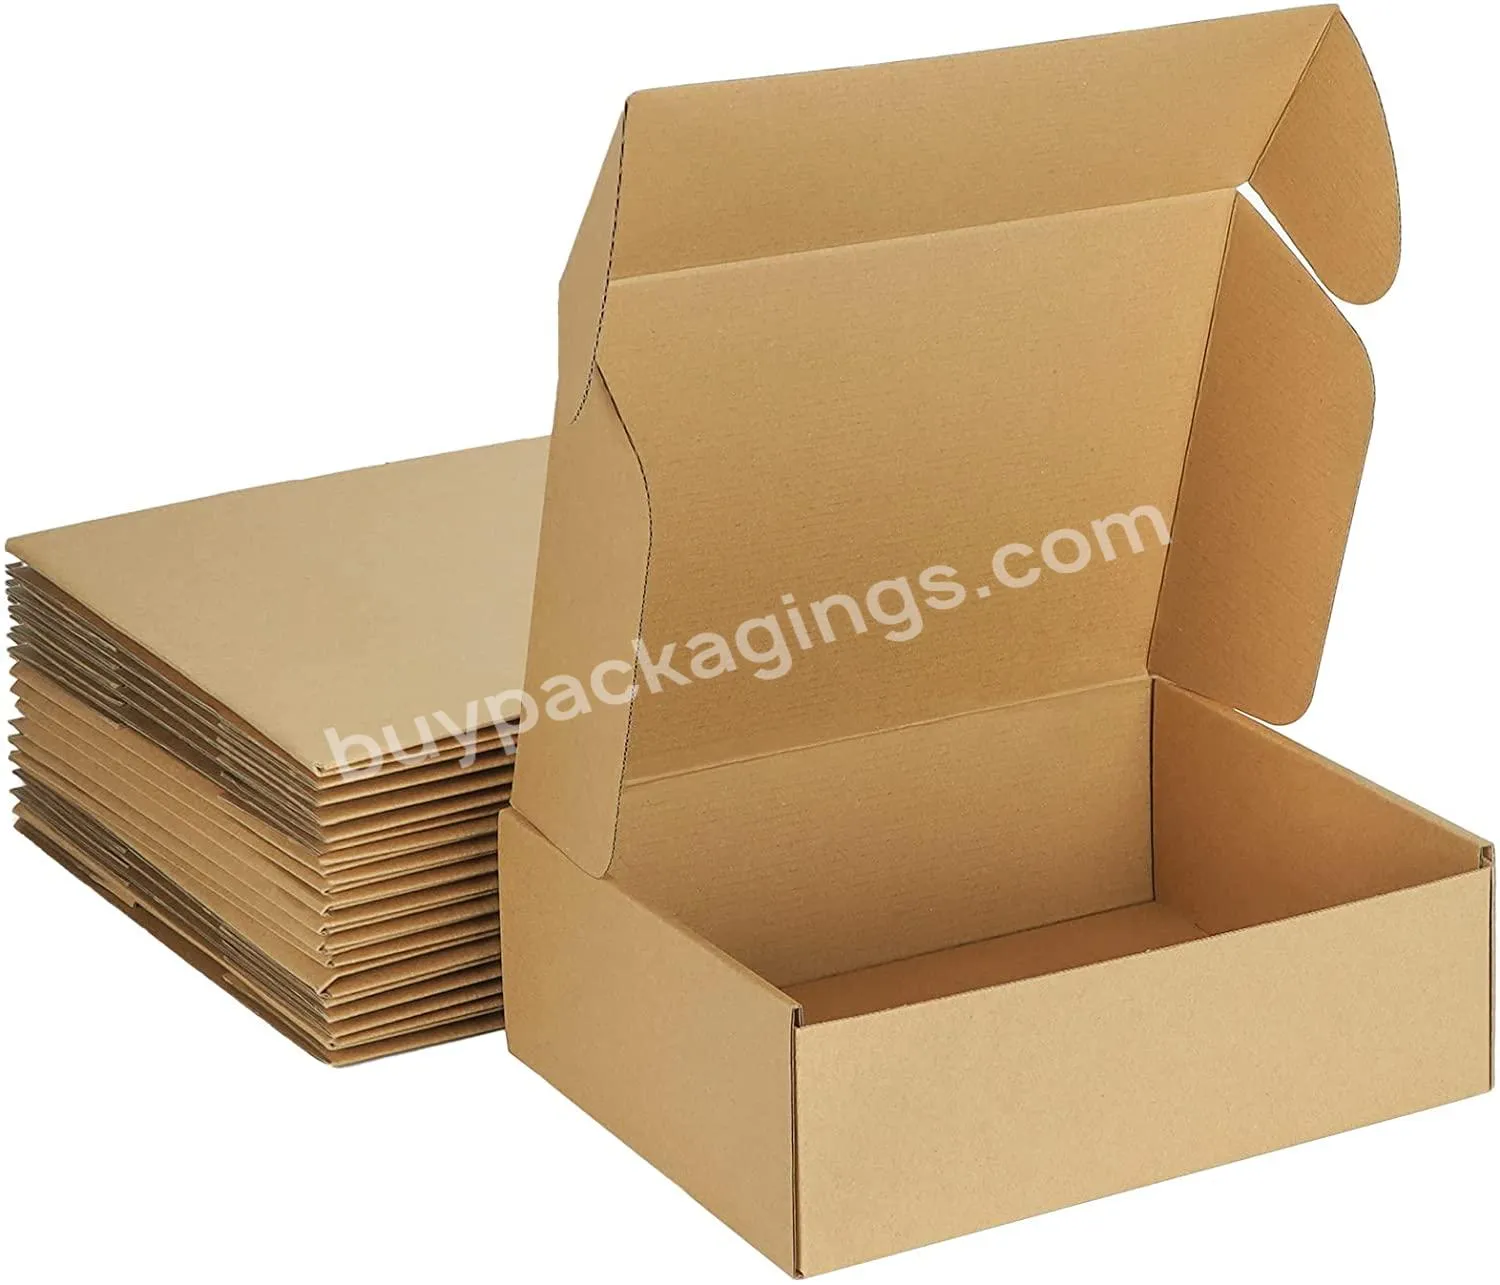 High Quality 7 X 5x 2 Inches Recycled Paperboard Packaging Shipping Mailer Boxes Ready To Ship Packing Boxes - Buy Shipping Boxes Cardboard,Shipping Book Boxes,Corrugated Shipping Box Custom.